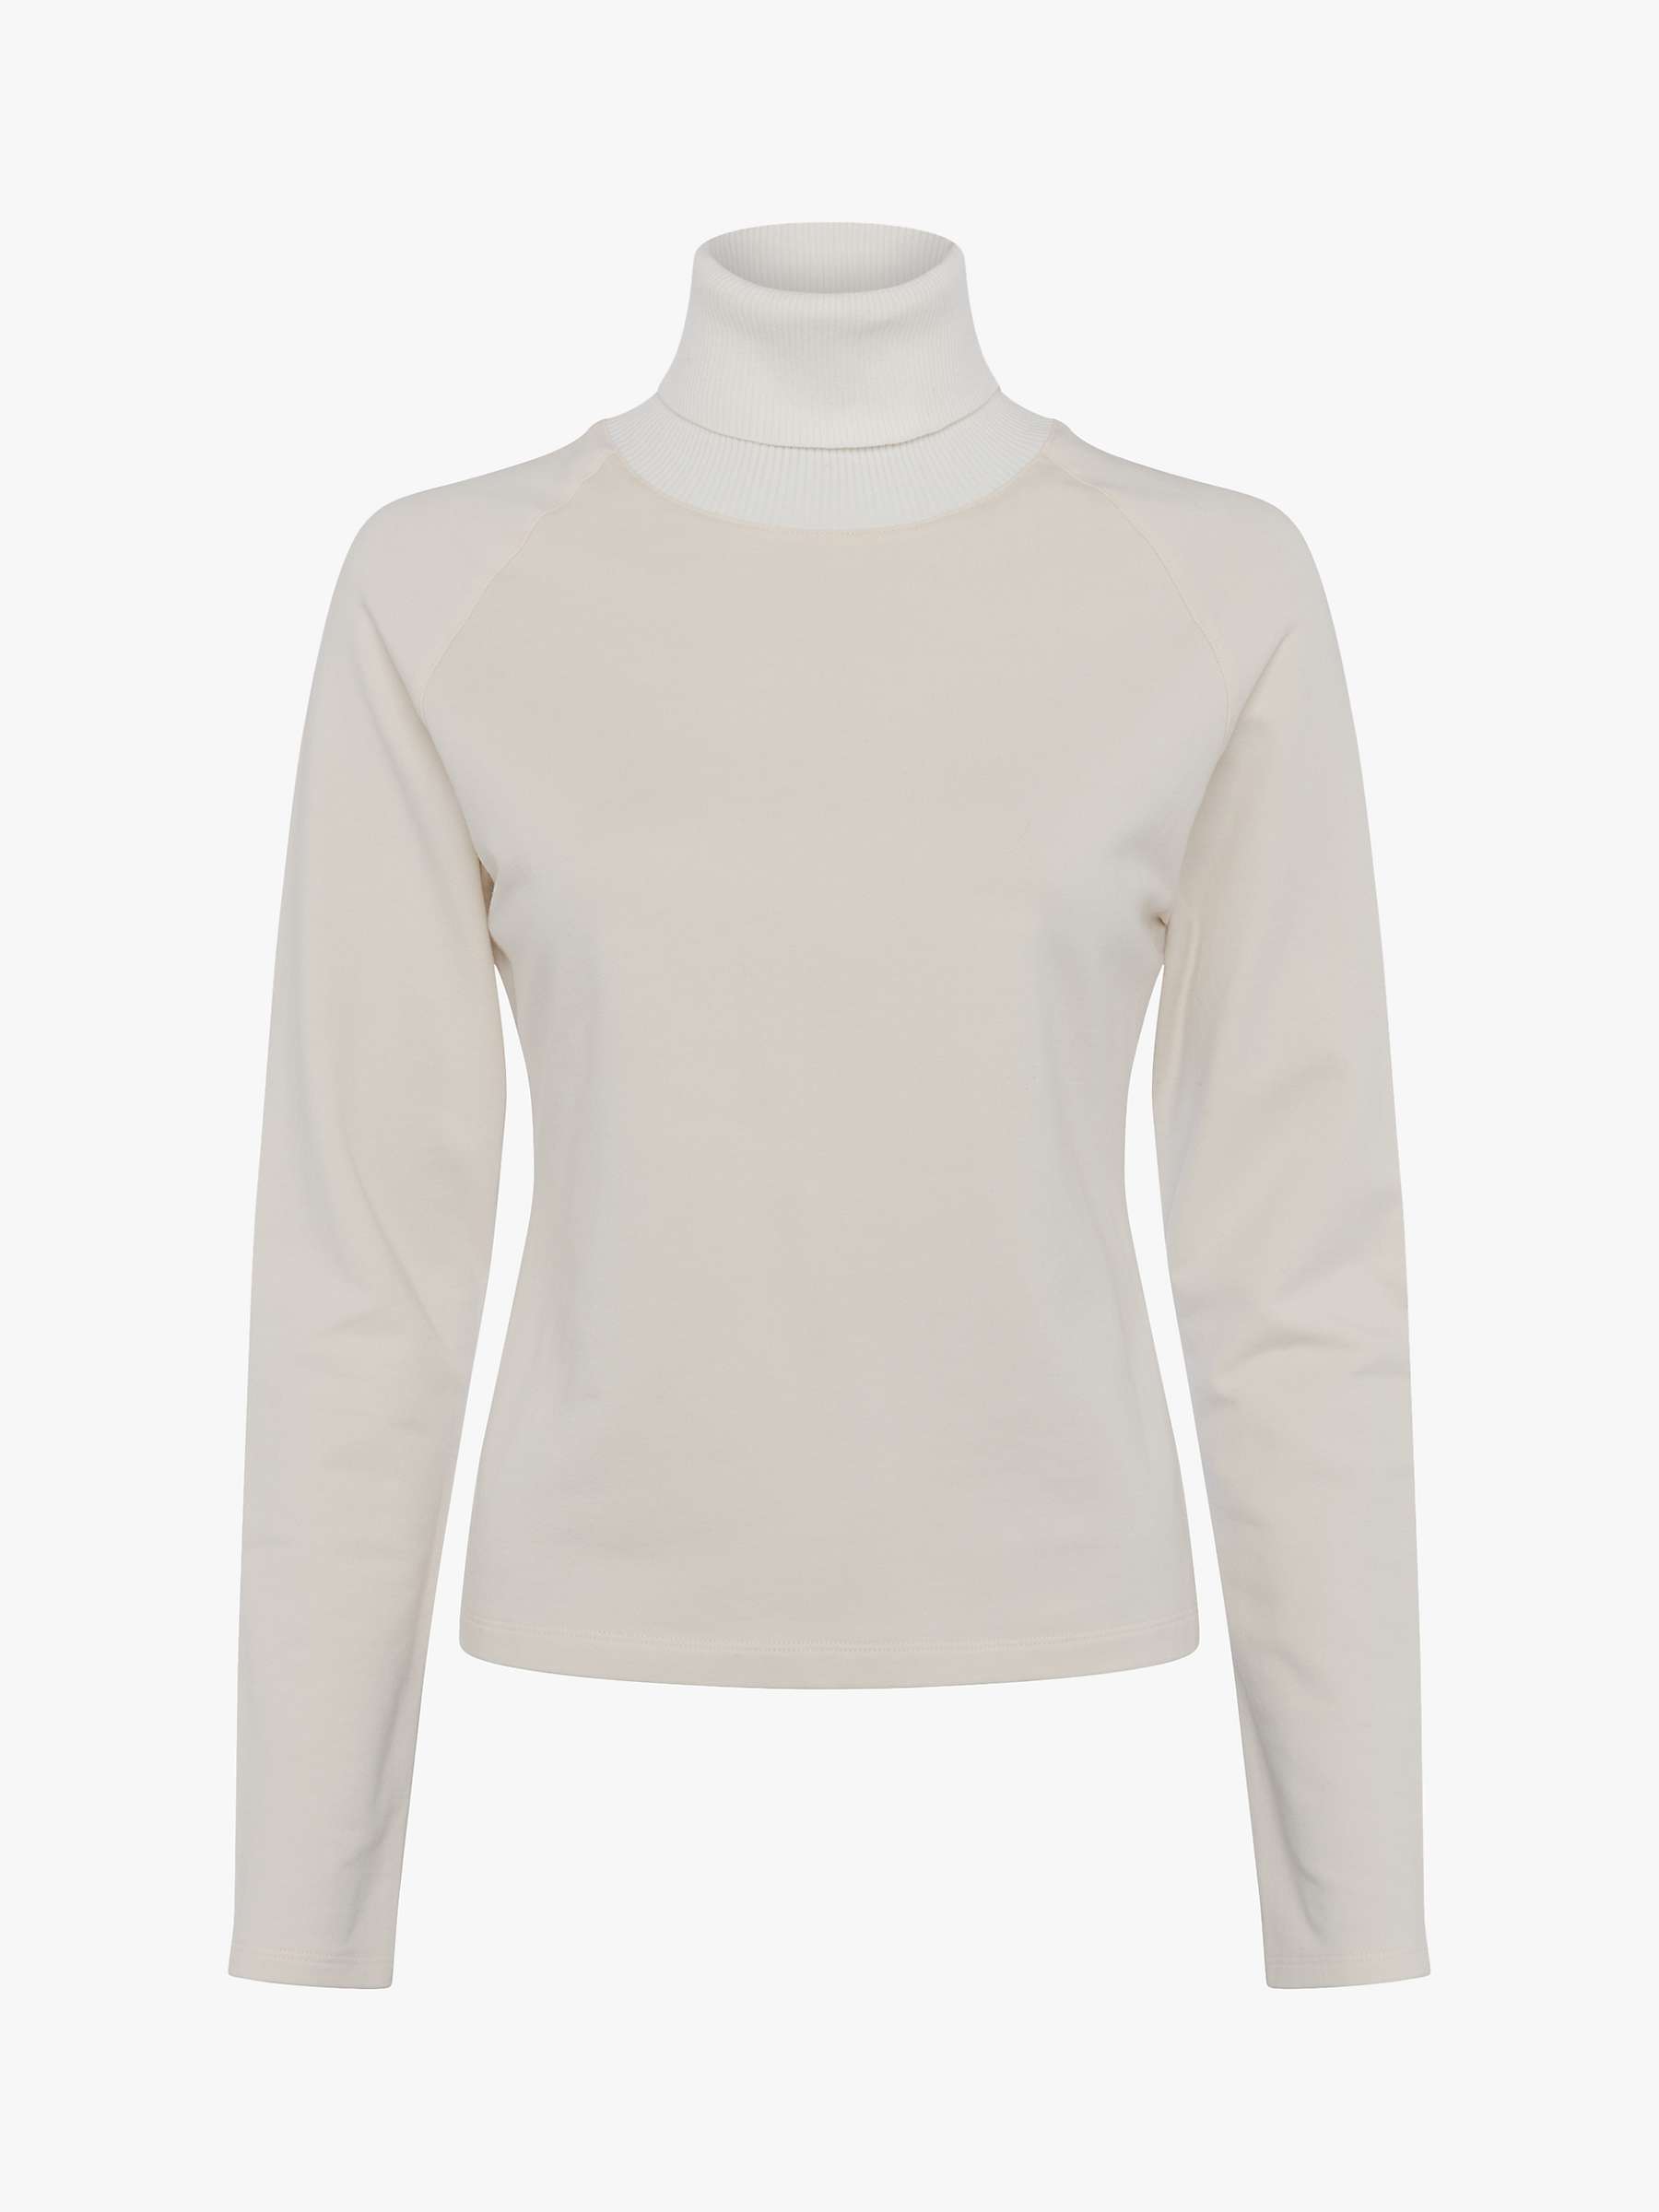 Buy French Connection Sonita Lace Back Top, Classic Cream Online at johnlewis.com